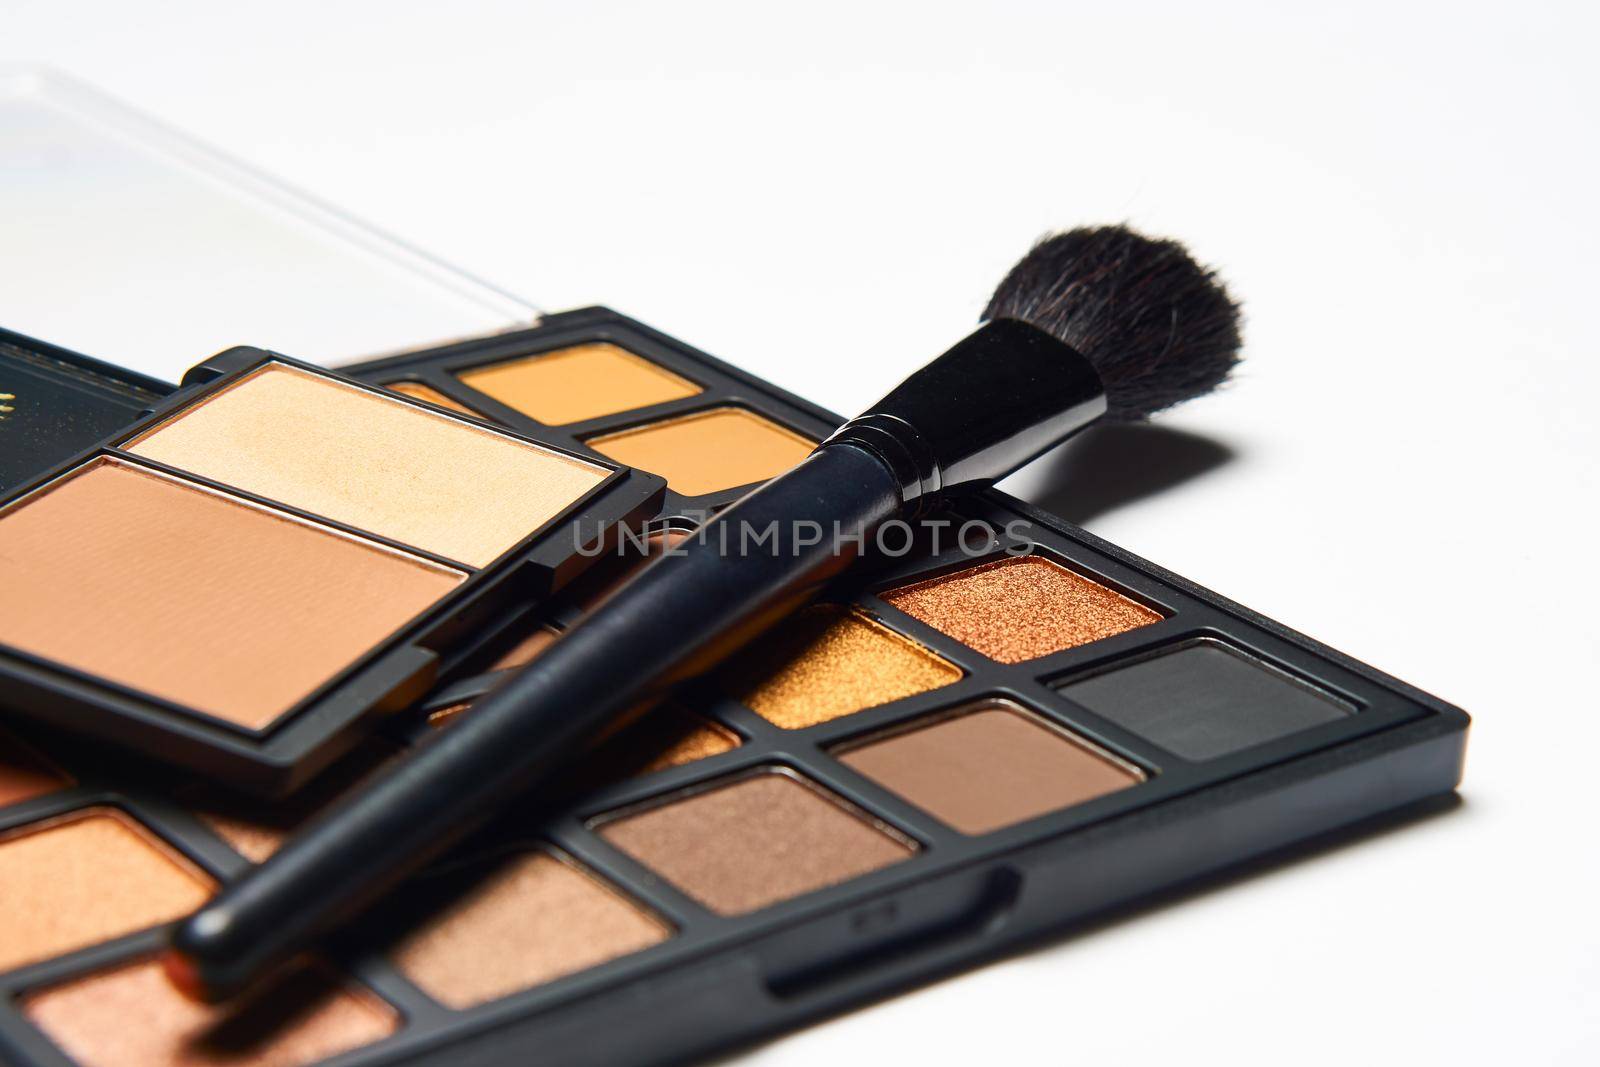 makeup brushes accessories cosmetics top view fashion. High quality photo